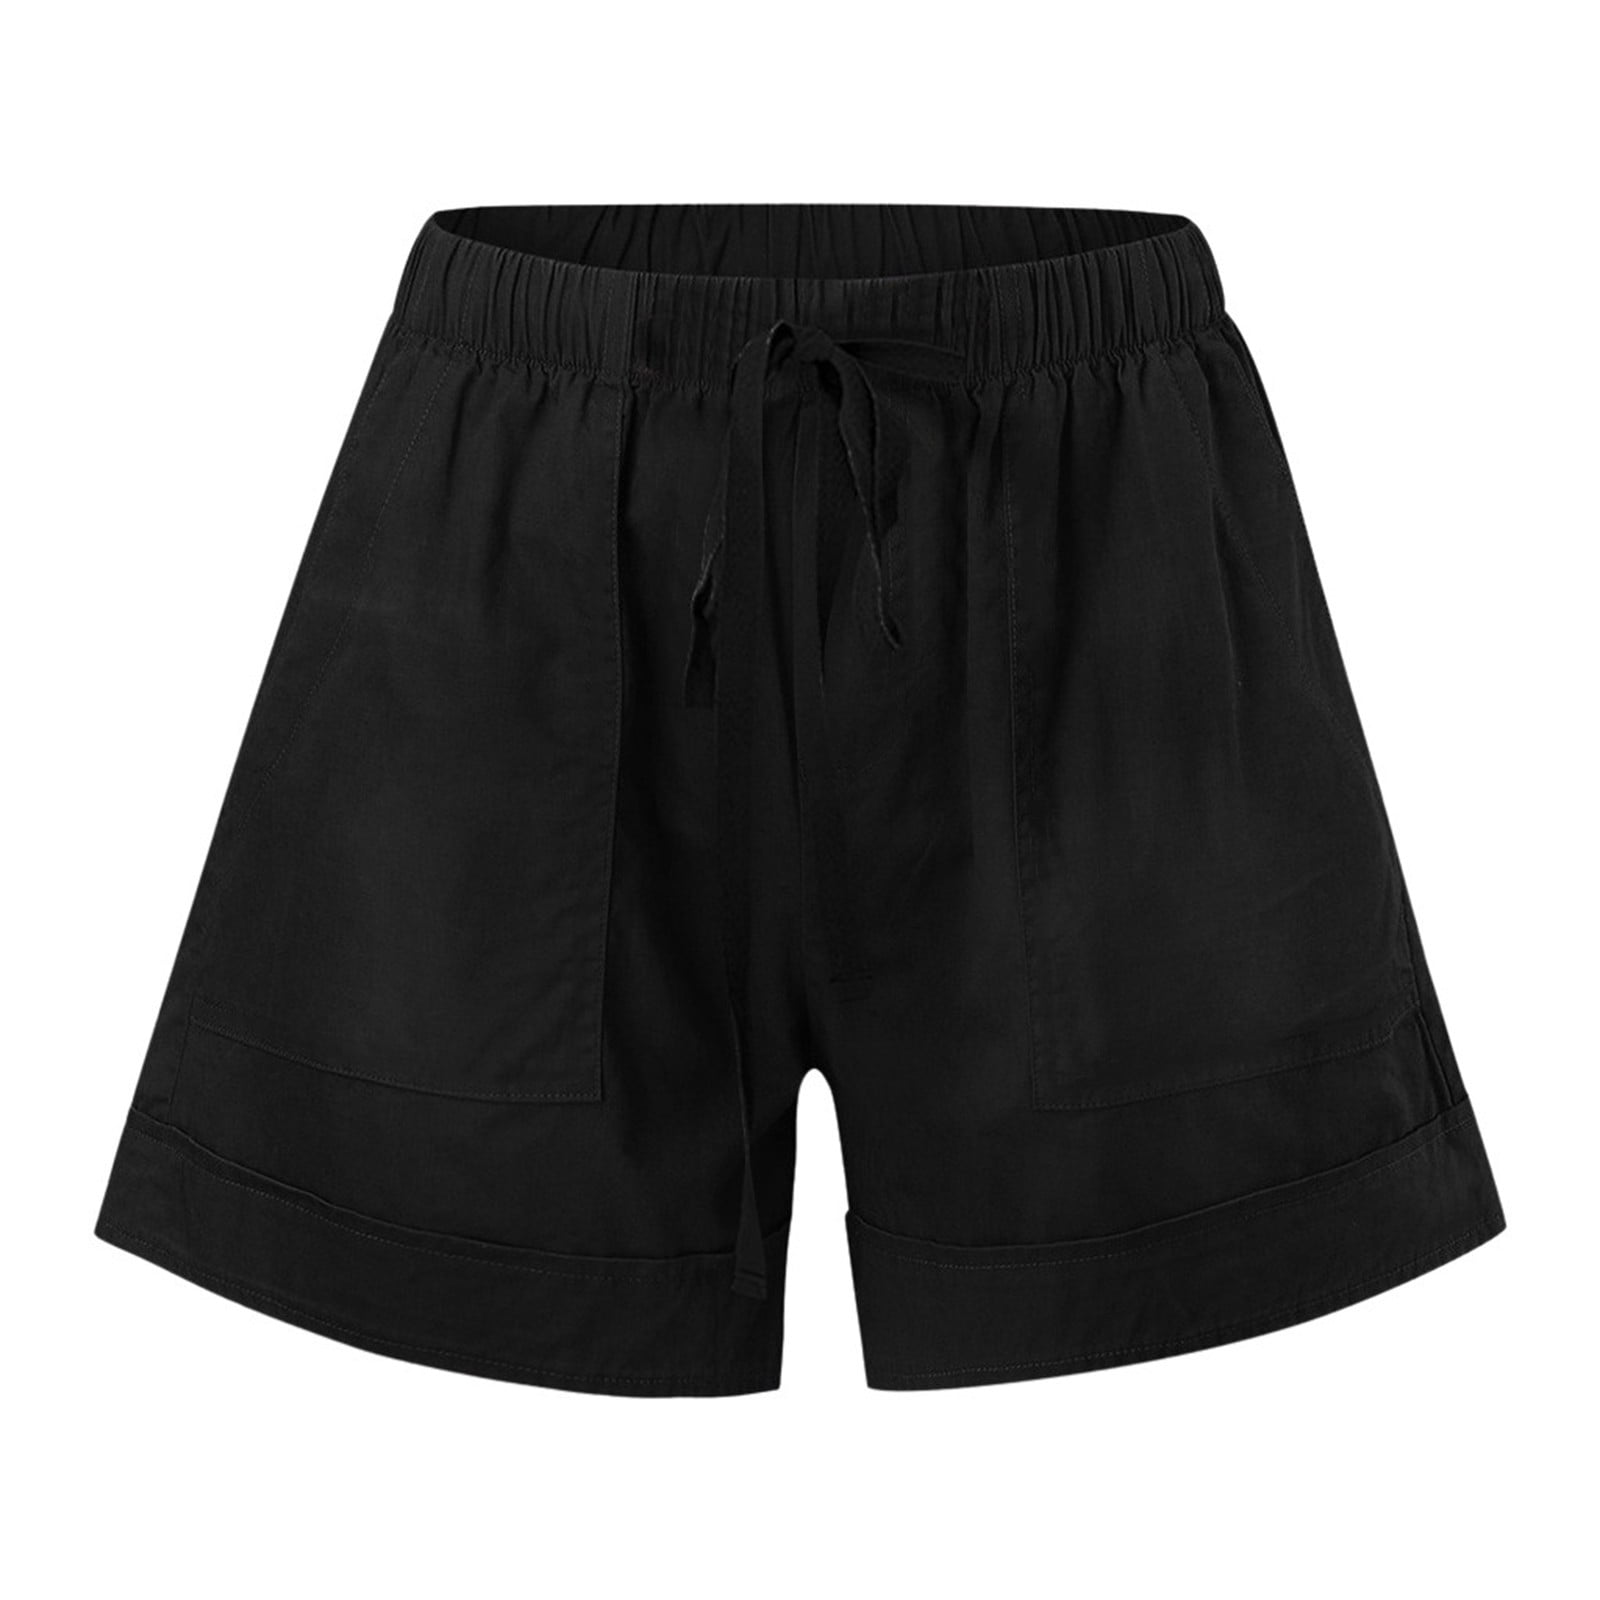 Comfy shorts for women are a must-have in a women's wardrobe, offering both comfort and style for various activities. When selecting comfy shorts